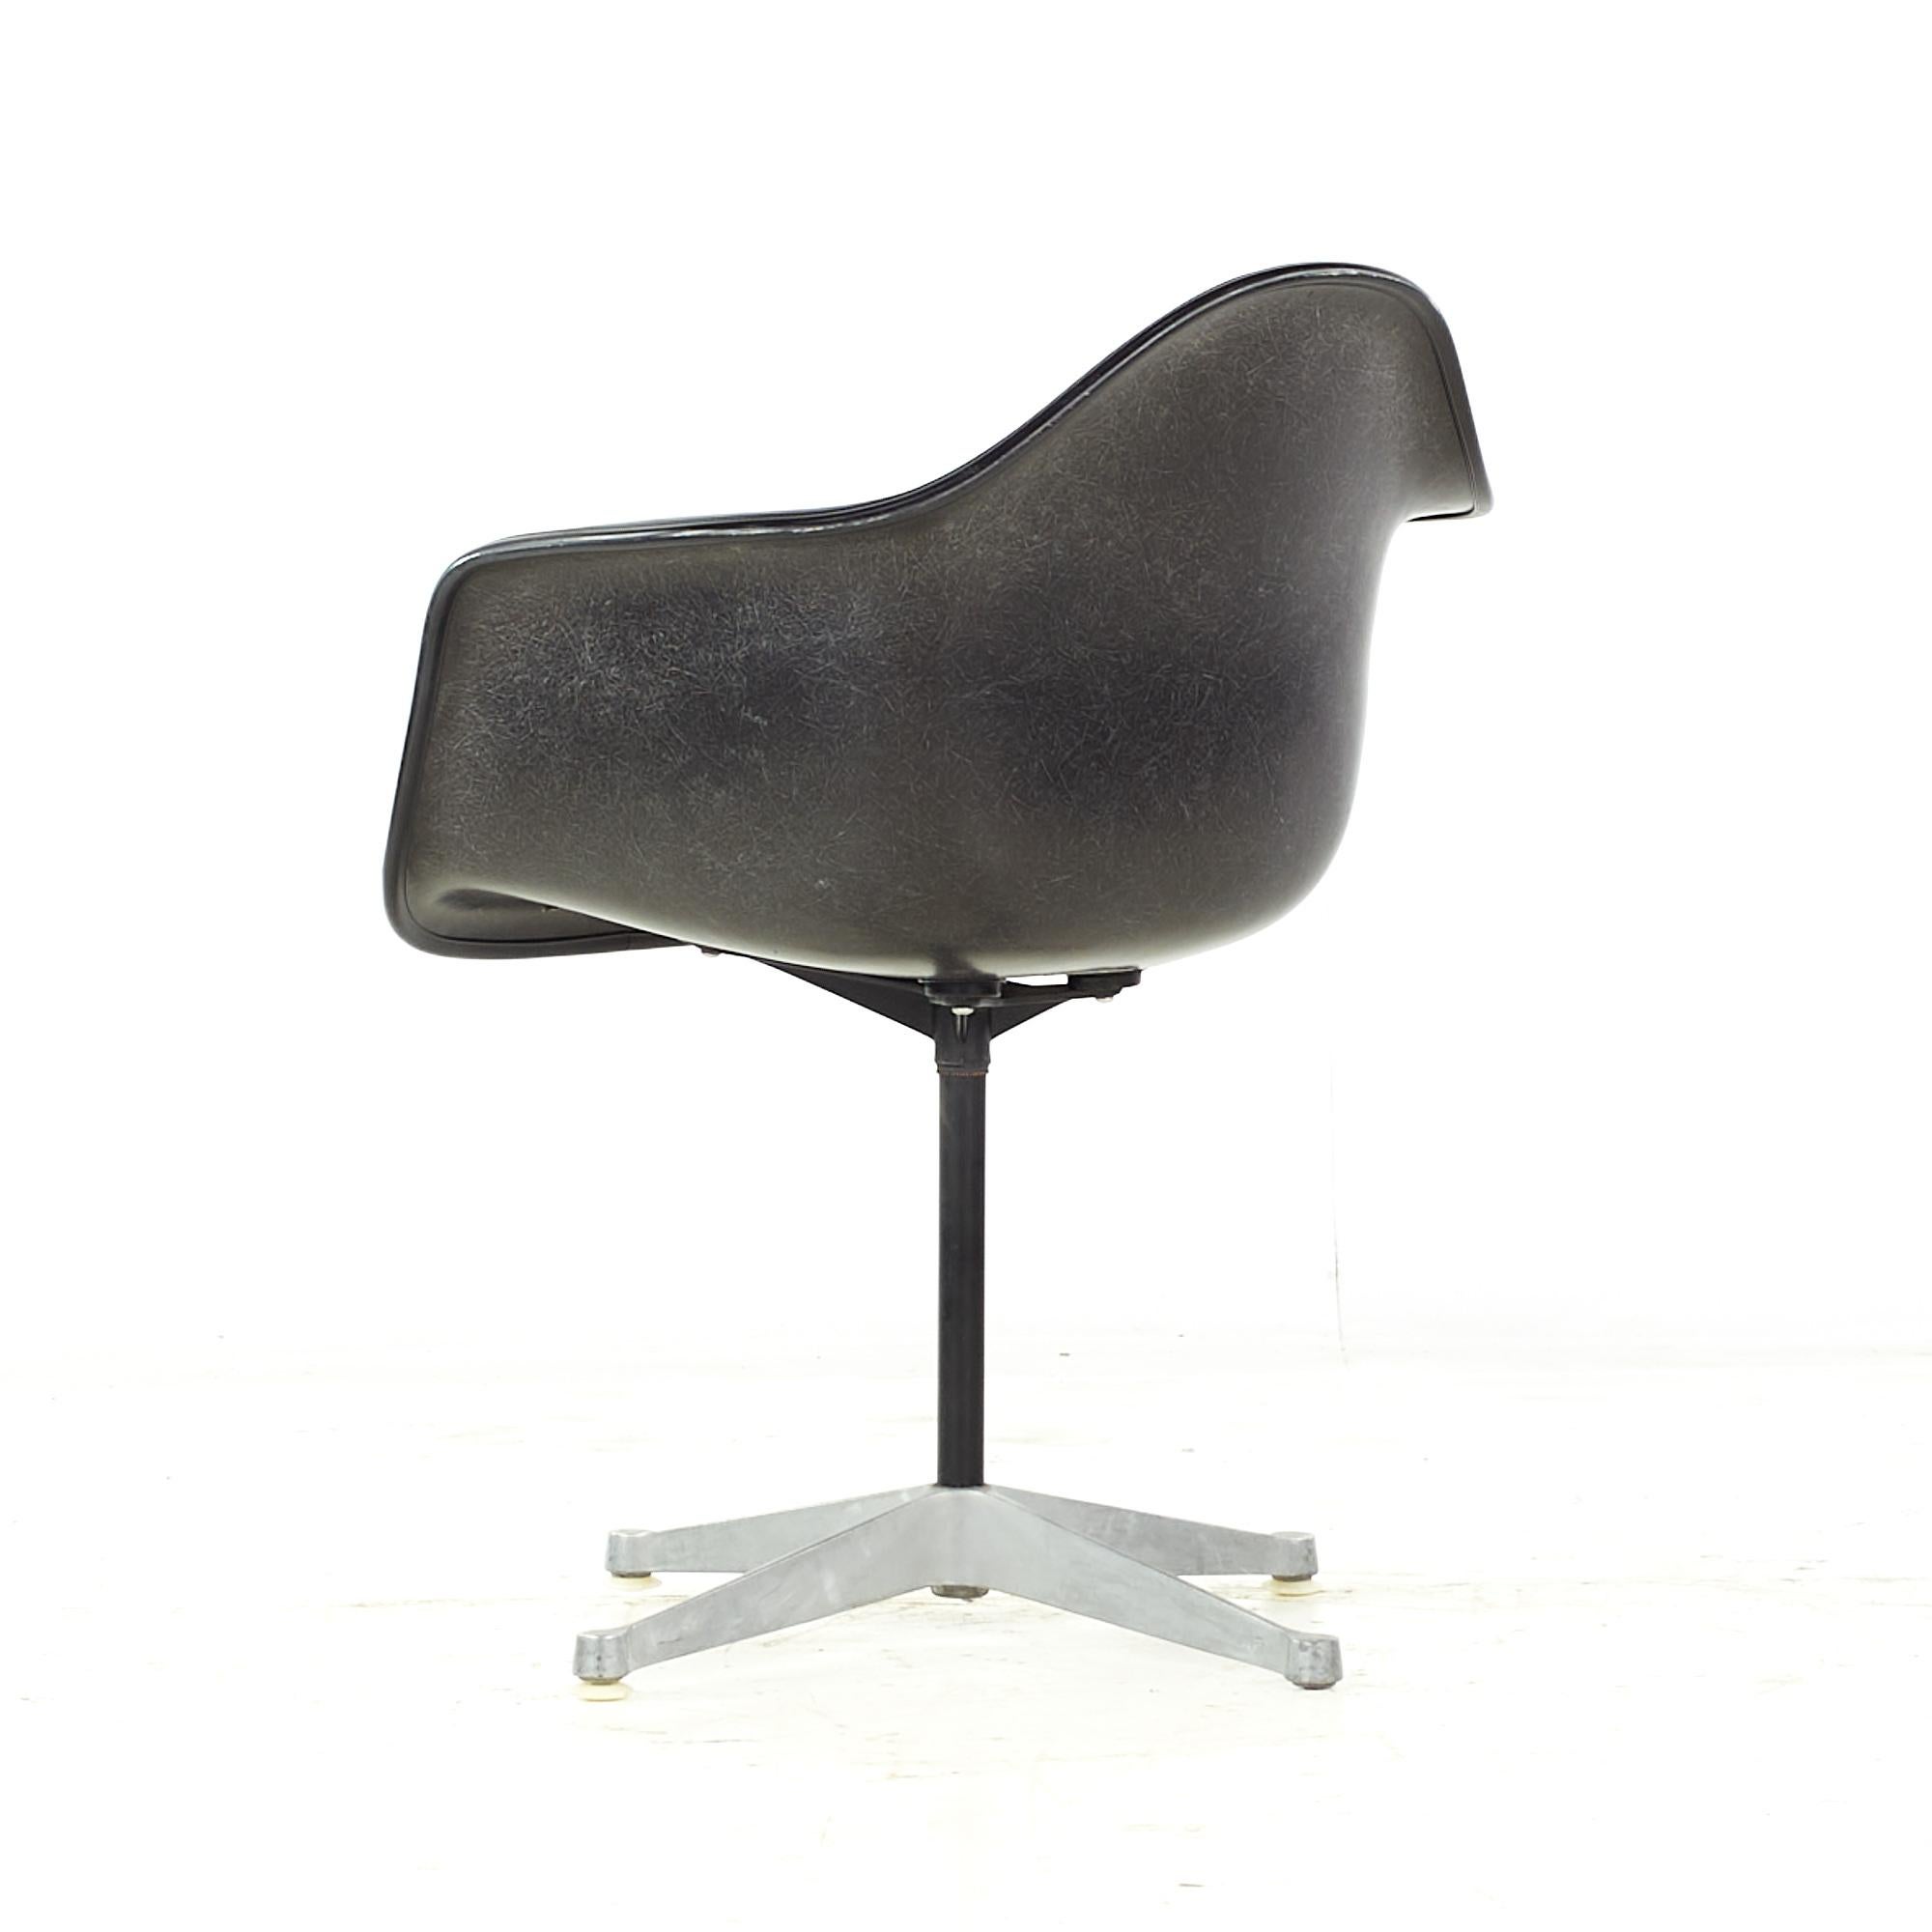 Late 20th Century Charles Eames for Herman Miller Mid Century Upholstered Shell Office Chair For Sale